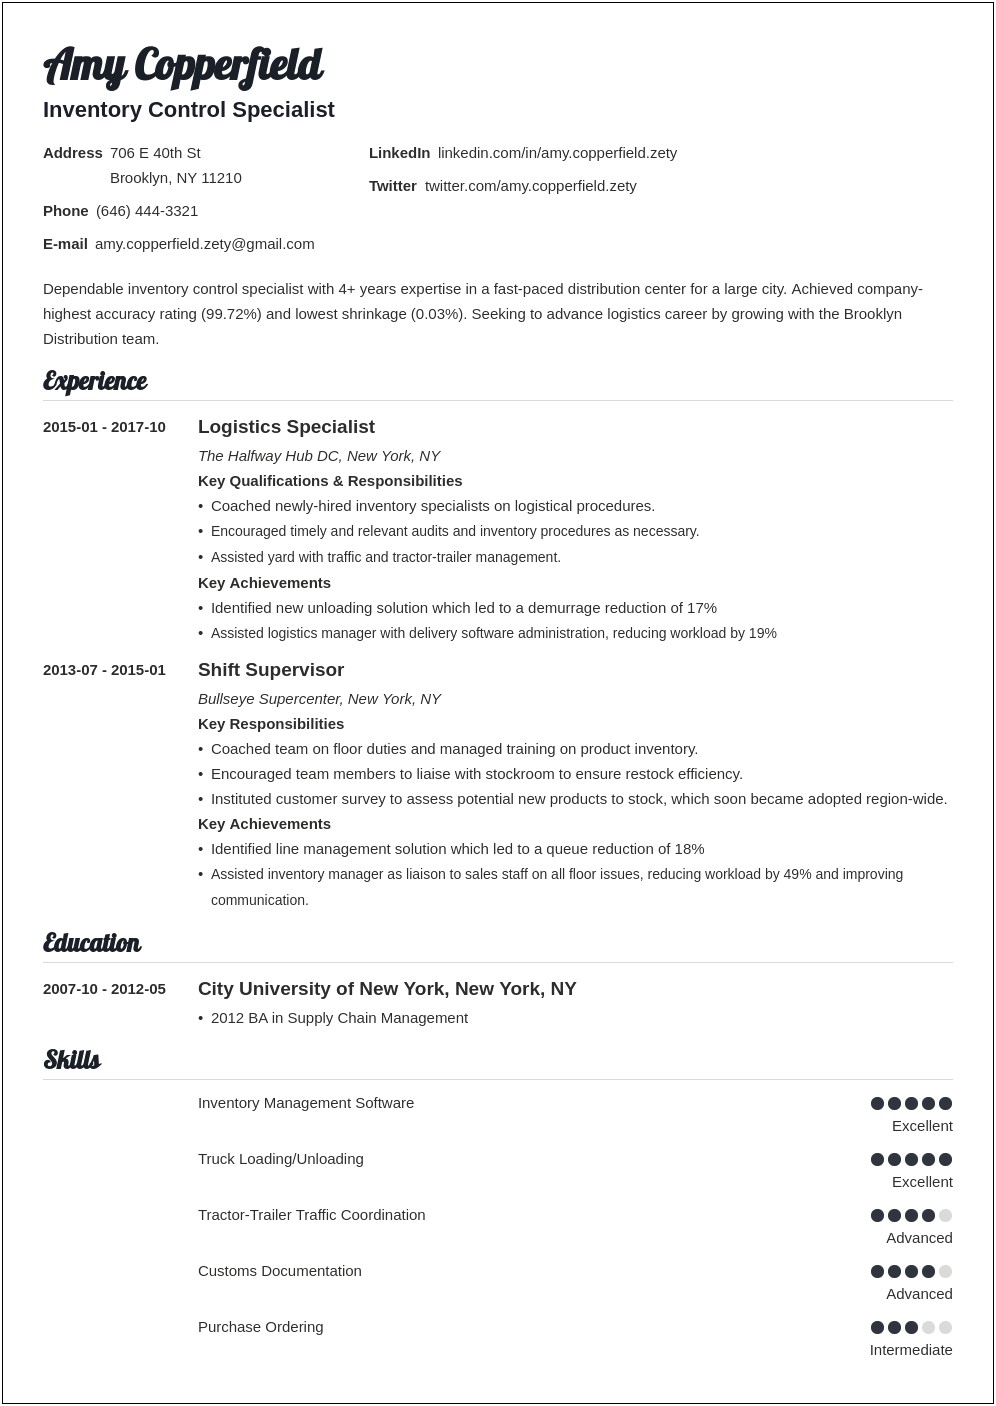 Sample Resume For Bpo Voice Process Experienced